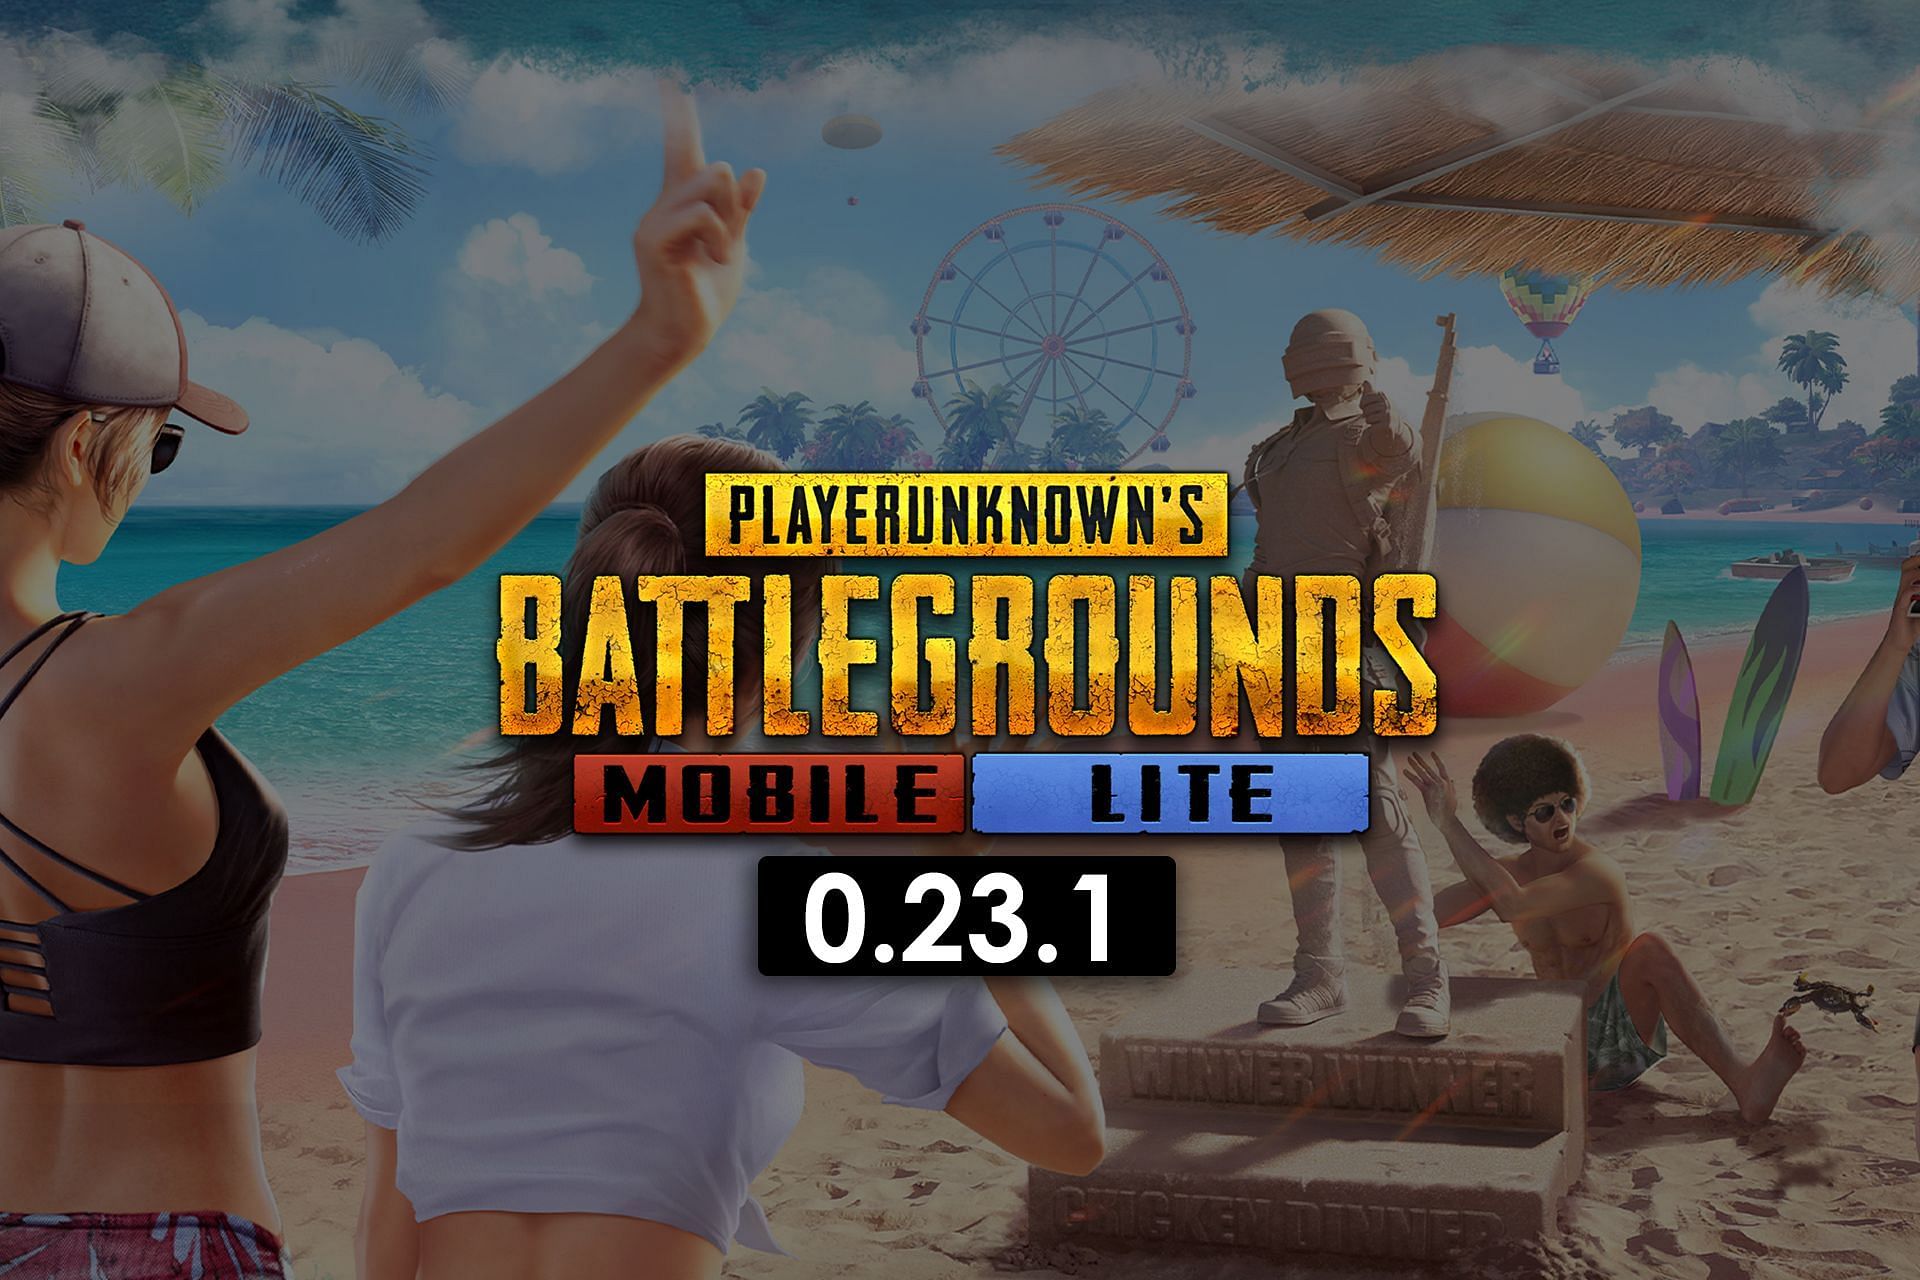 A step-by-step guide to downloading and installing the new PUBG Mobile Lite 0.23.1 version (Image via Sportskeeda)